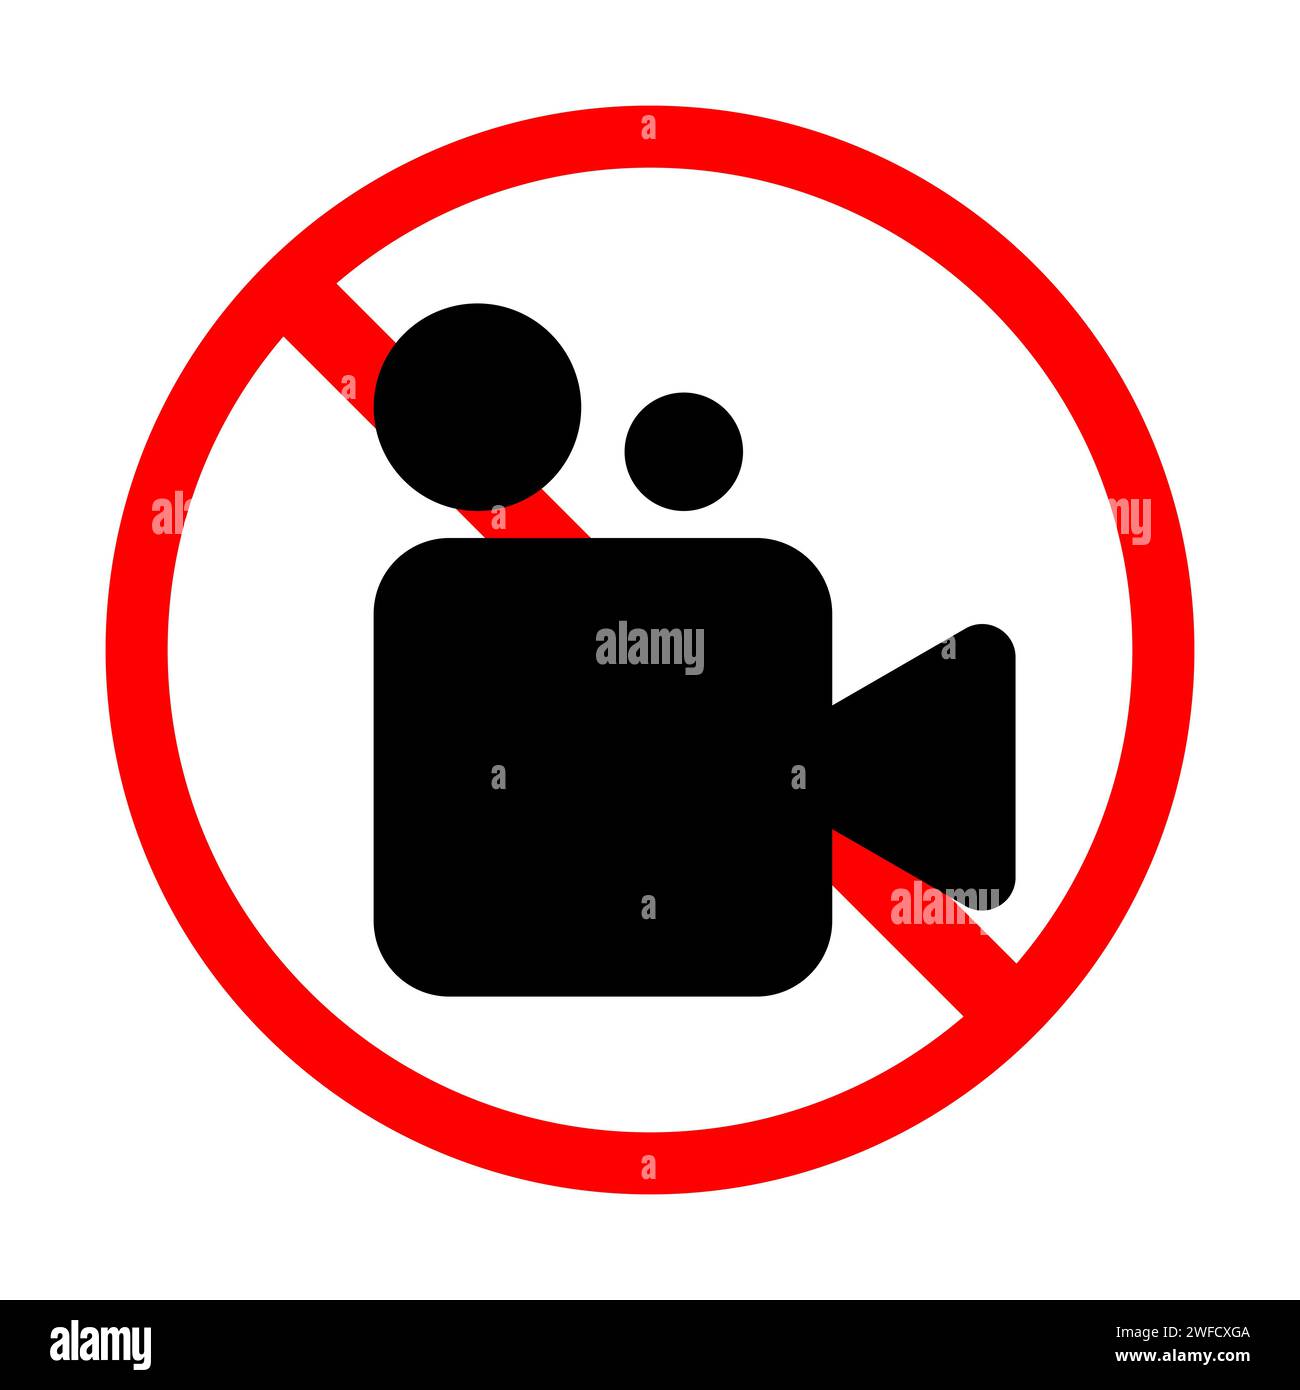 No video camera icon. Stop symbol. Red circle. Prohibited sign. Recording equipment. Vector illustration. Stock image. EPS 10. Stock Vector